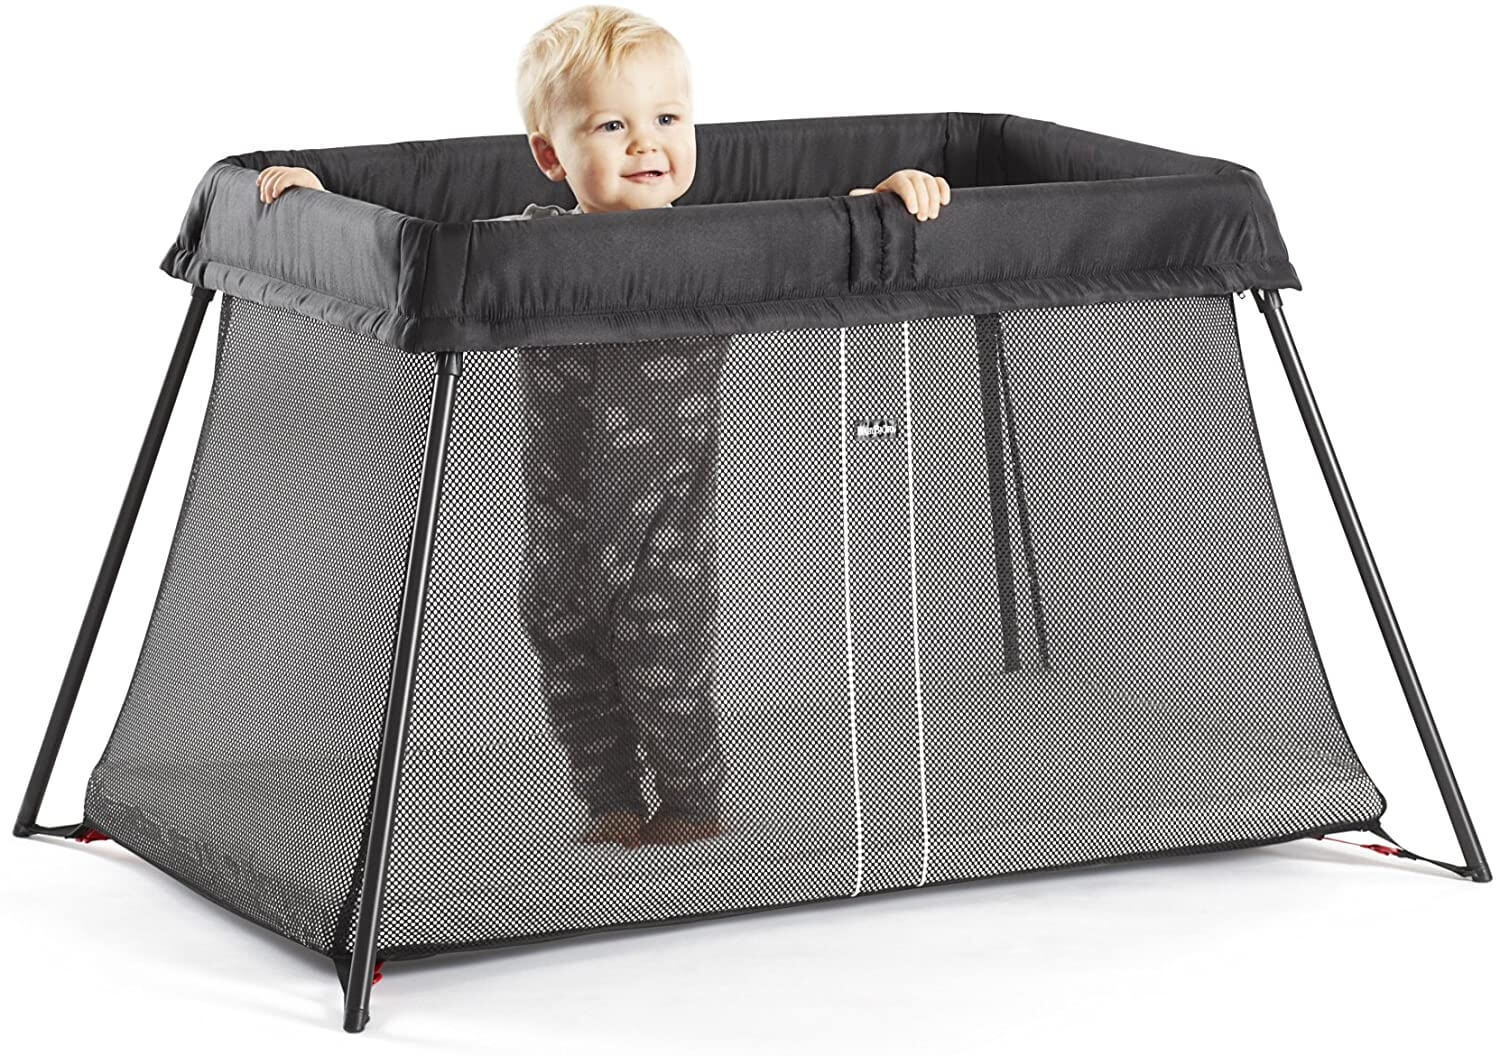 A Baby Bjorn travel cot 